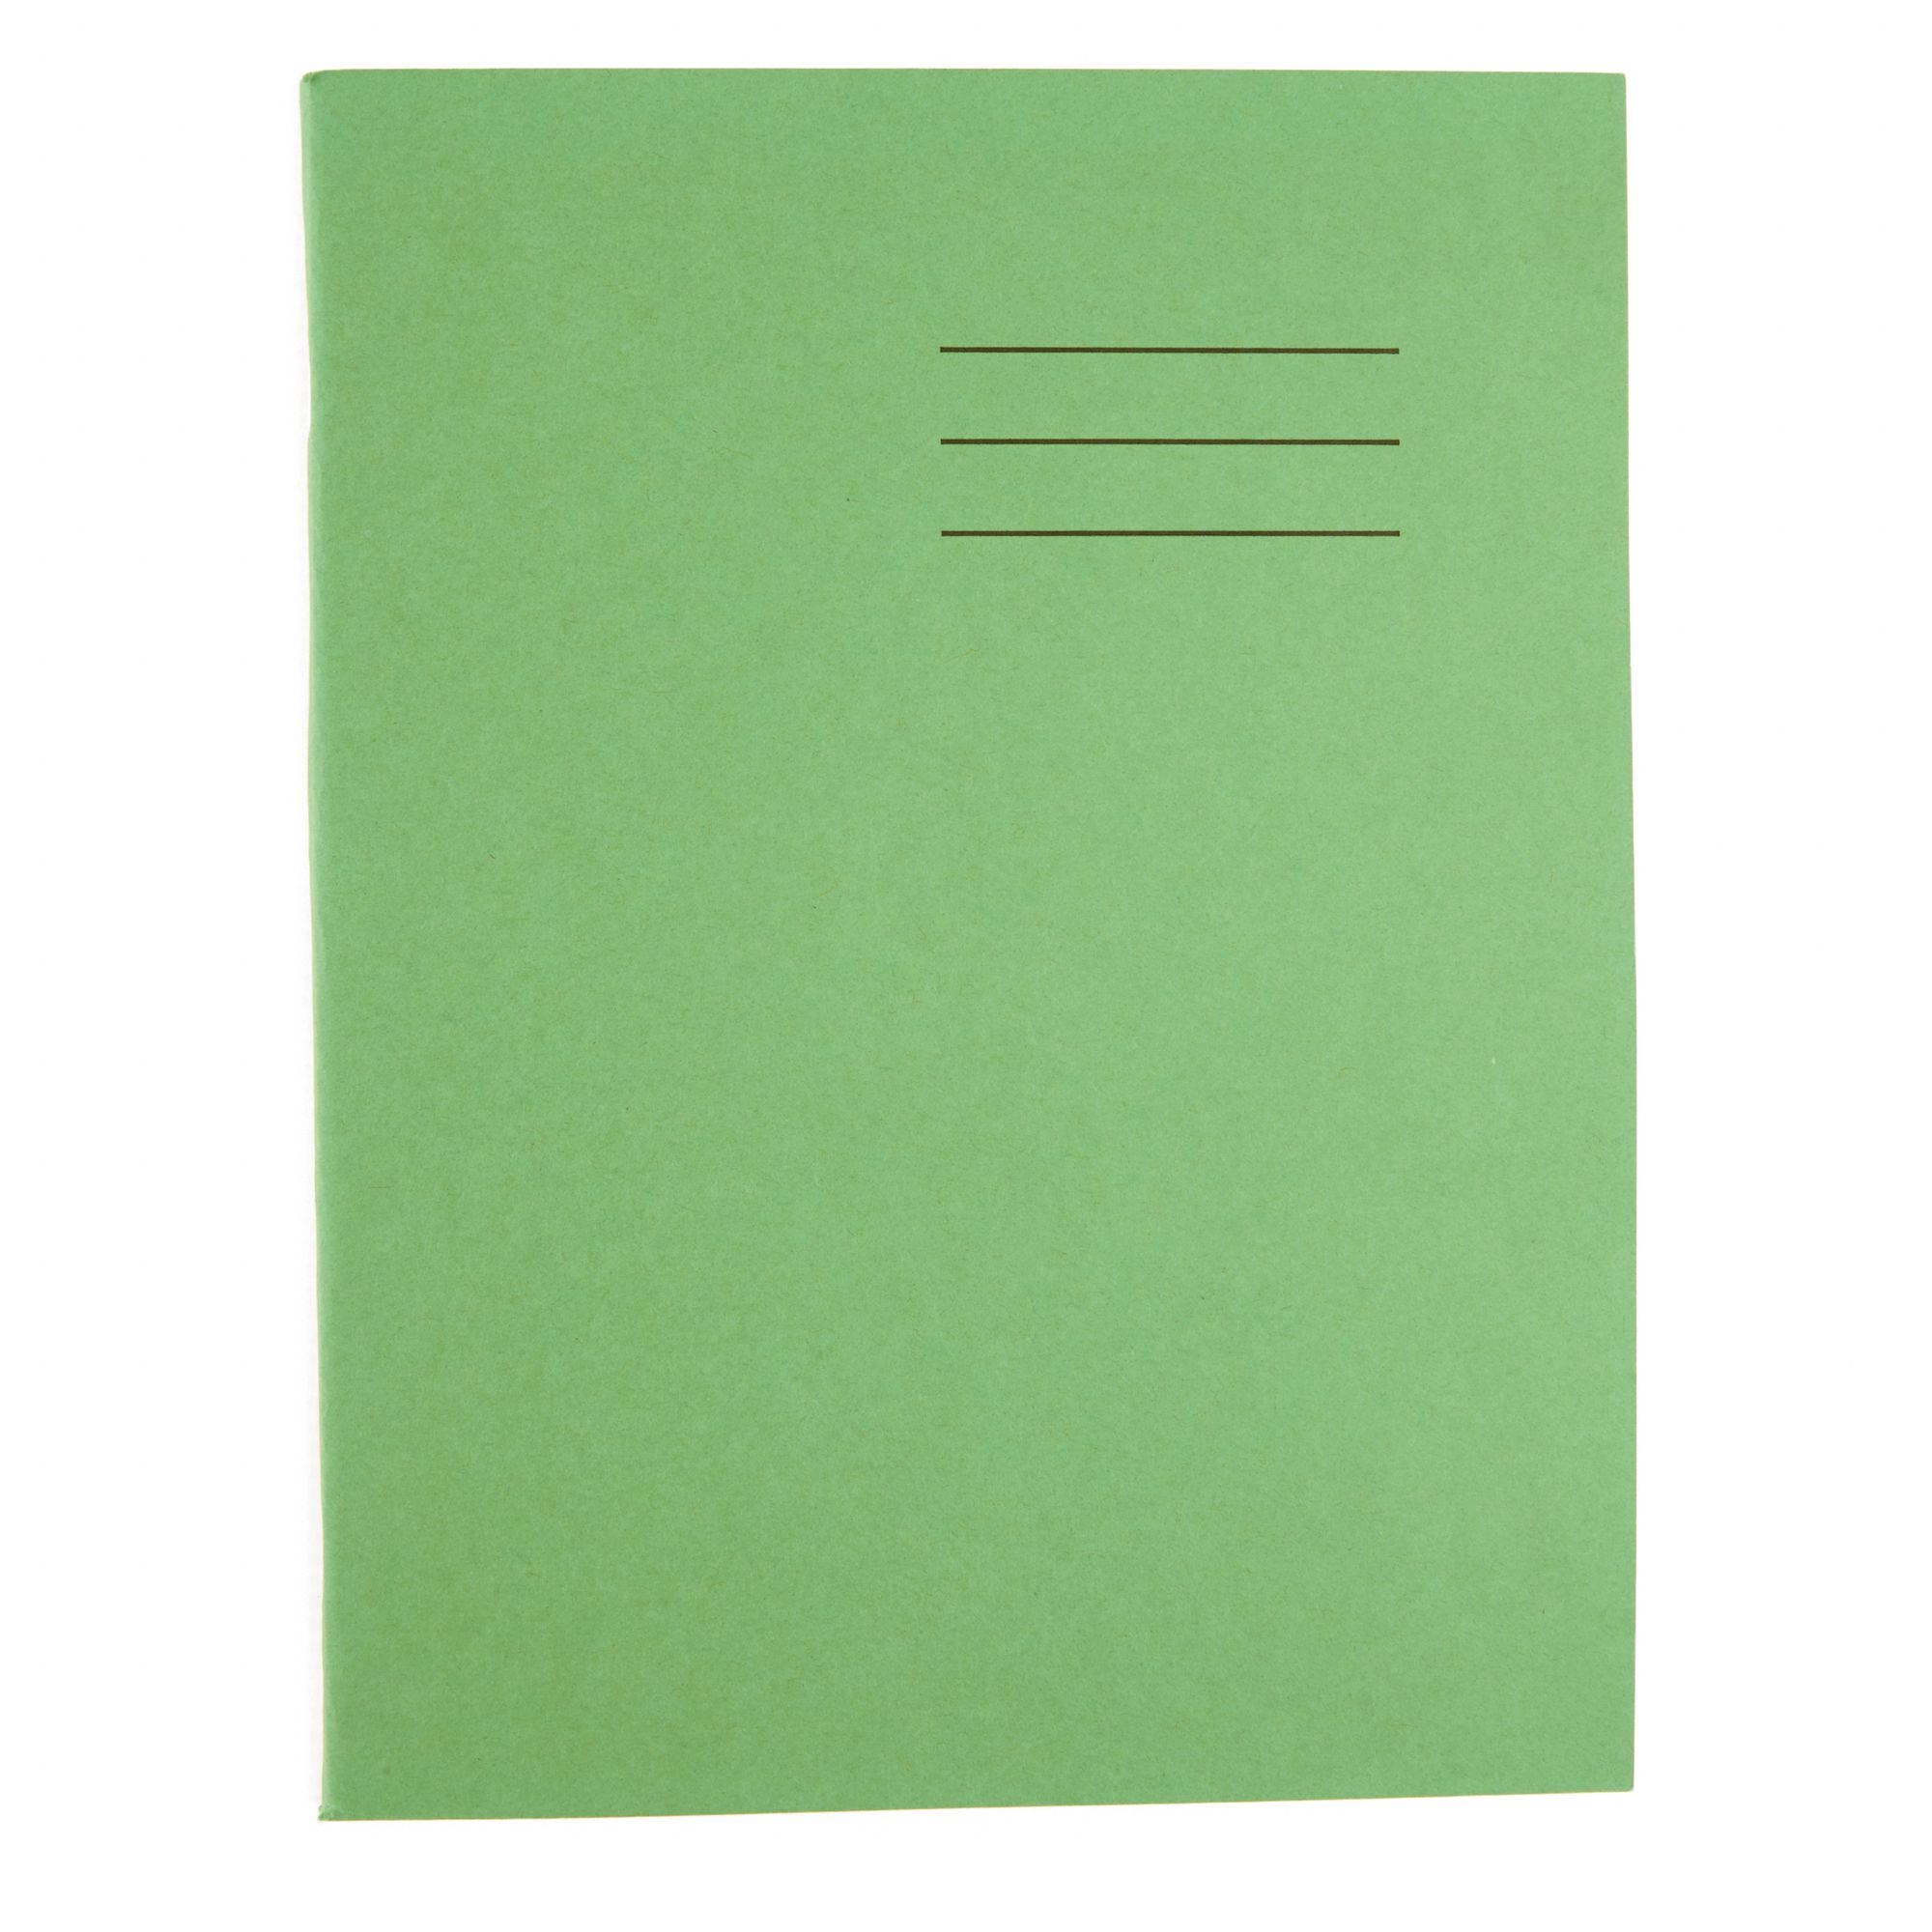 9x7 Exercise Book 80 Page, 6mm Ruled with Margin, Light Green - Pack of 100